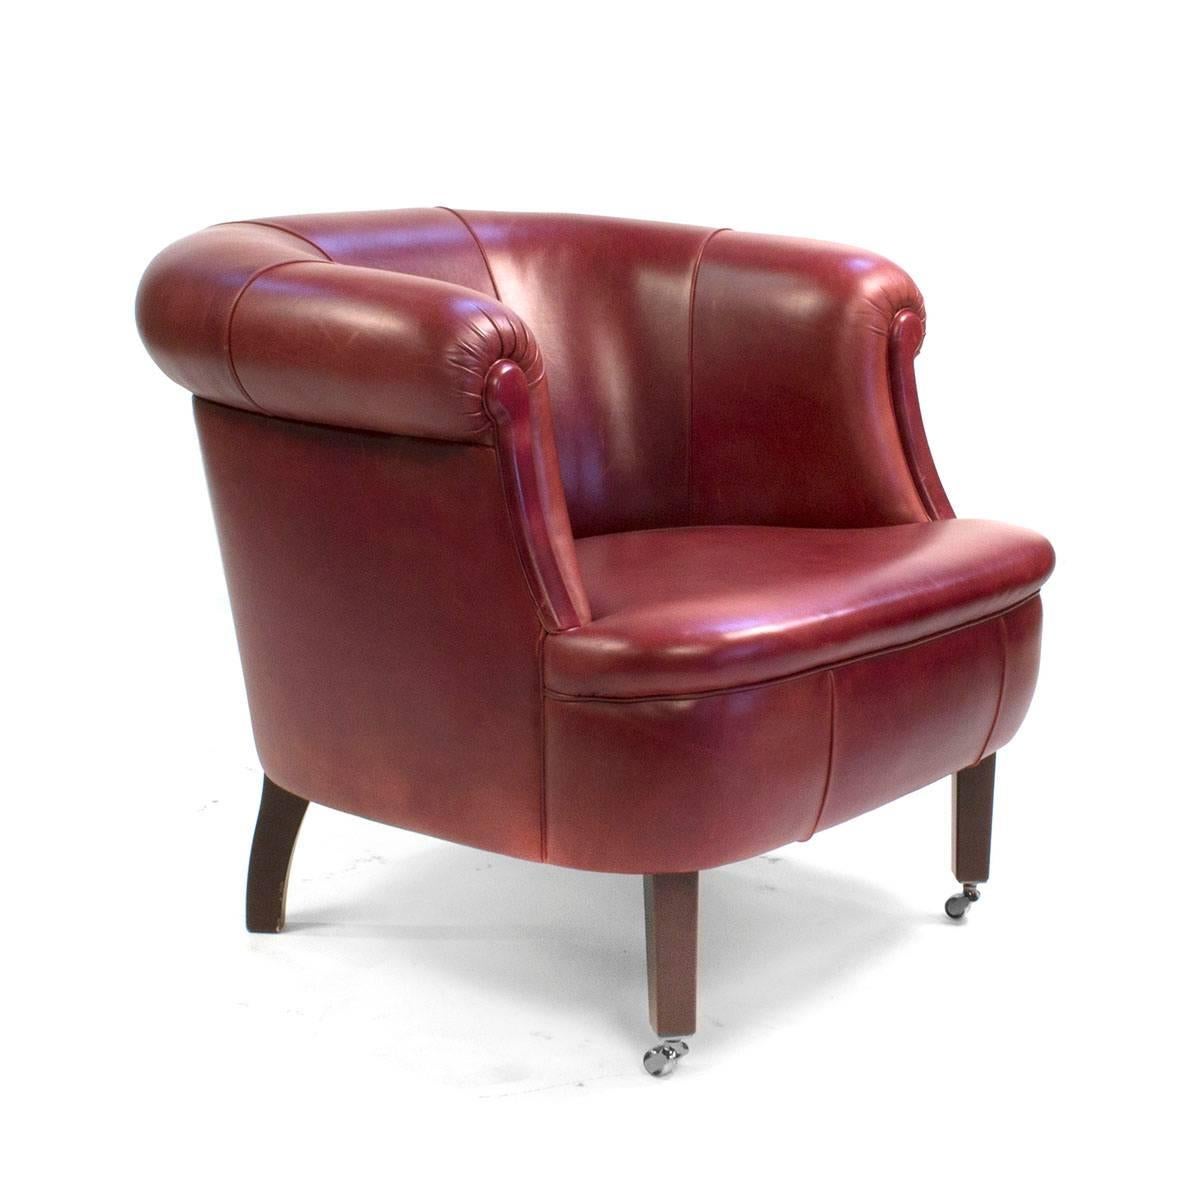 Lyra made its debut as a full leather article in Poltrona Frau's catalogue of 1934, as a variant of Lira, an earlier model (from 1916) that had a velvet cushion. The 1934 replica still sported a rounded seatback and finishing by means of a row of